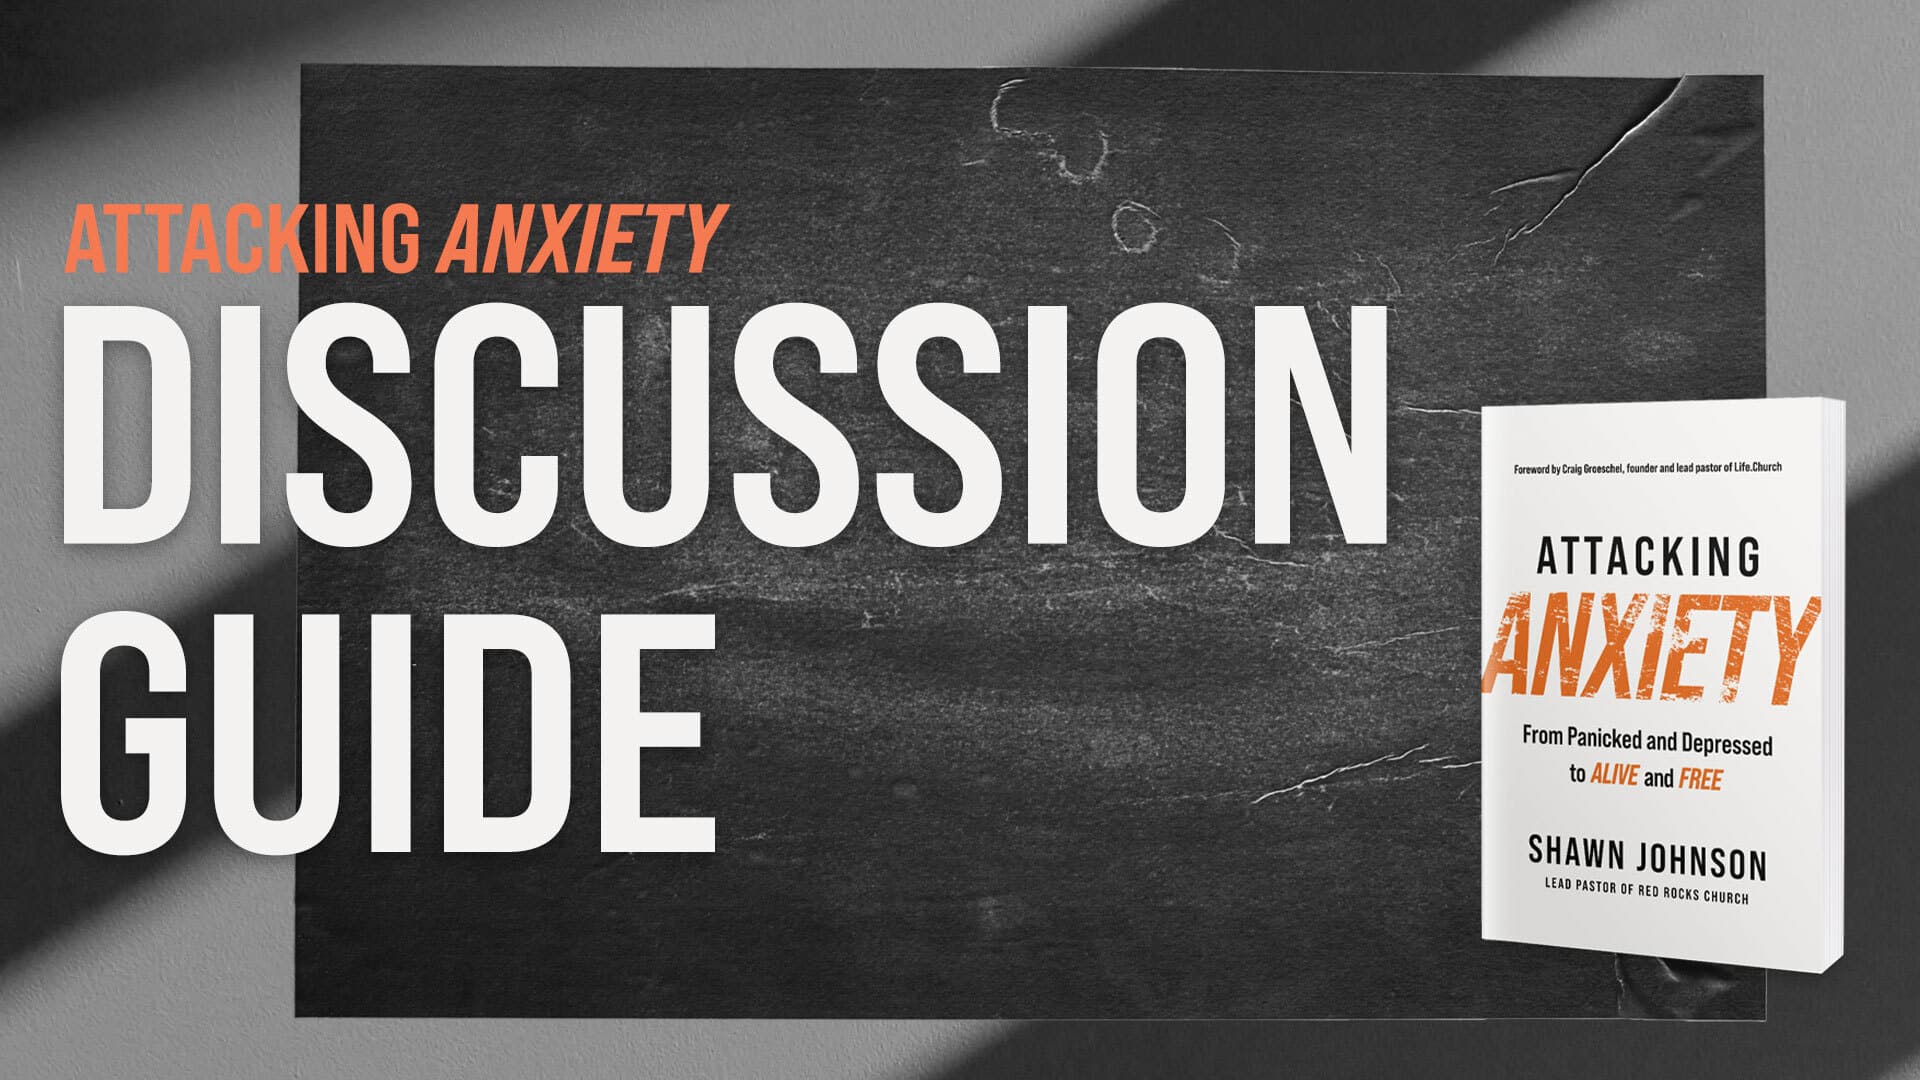 Attacking Anxiety: Discussion Guide